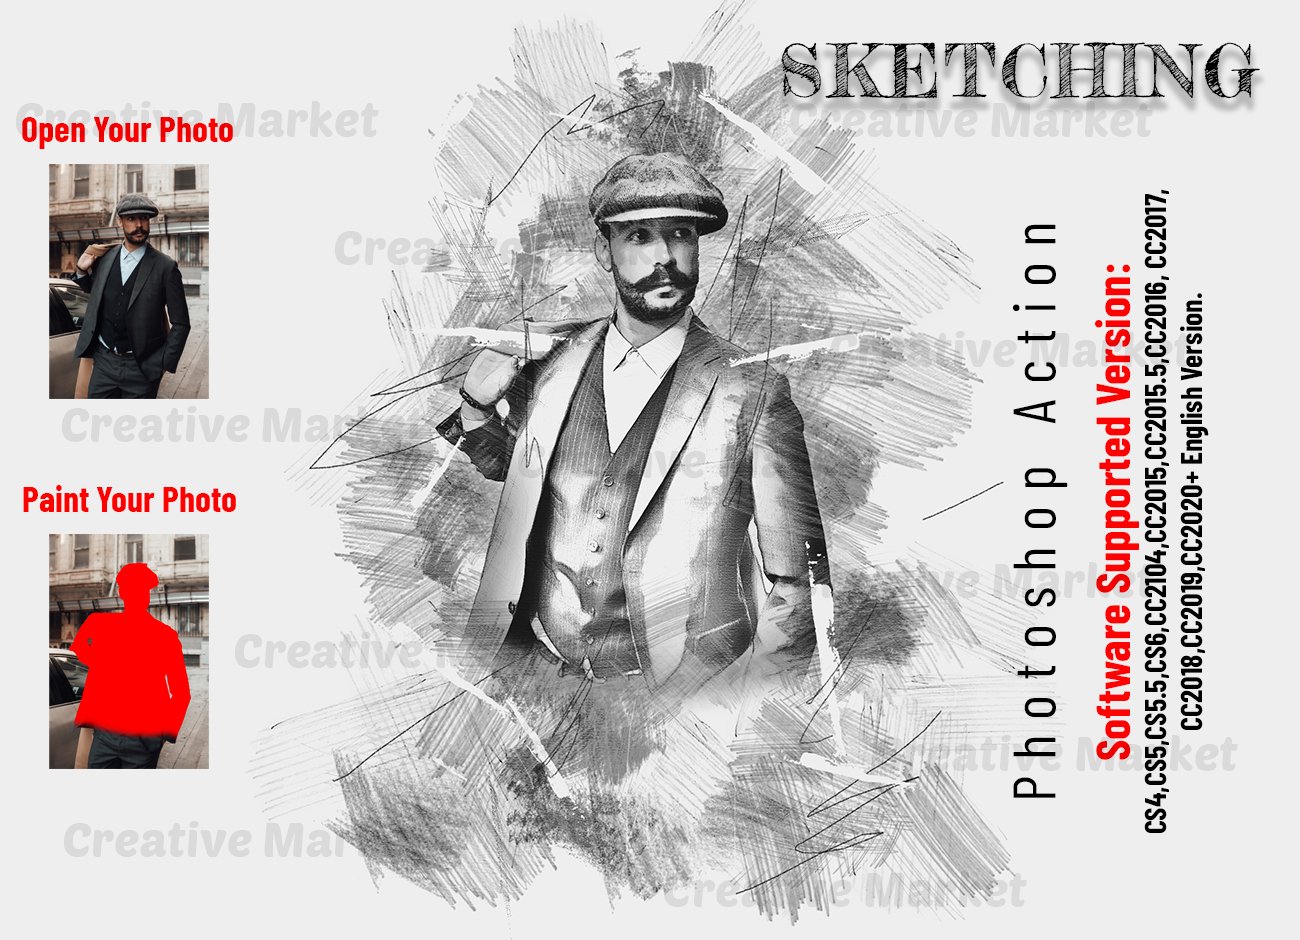 Sketching Photoshop Actioncover image.